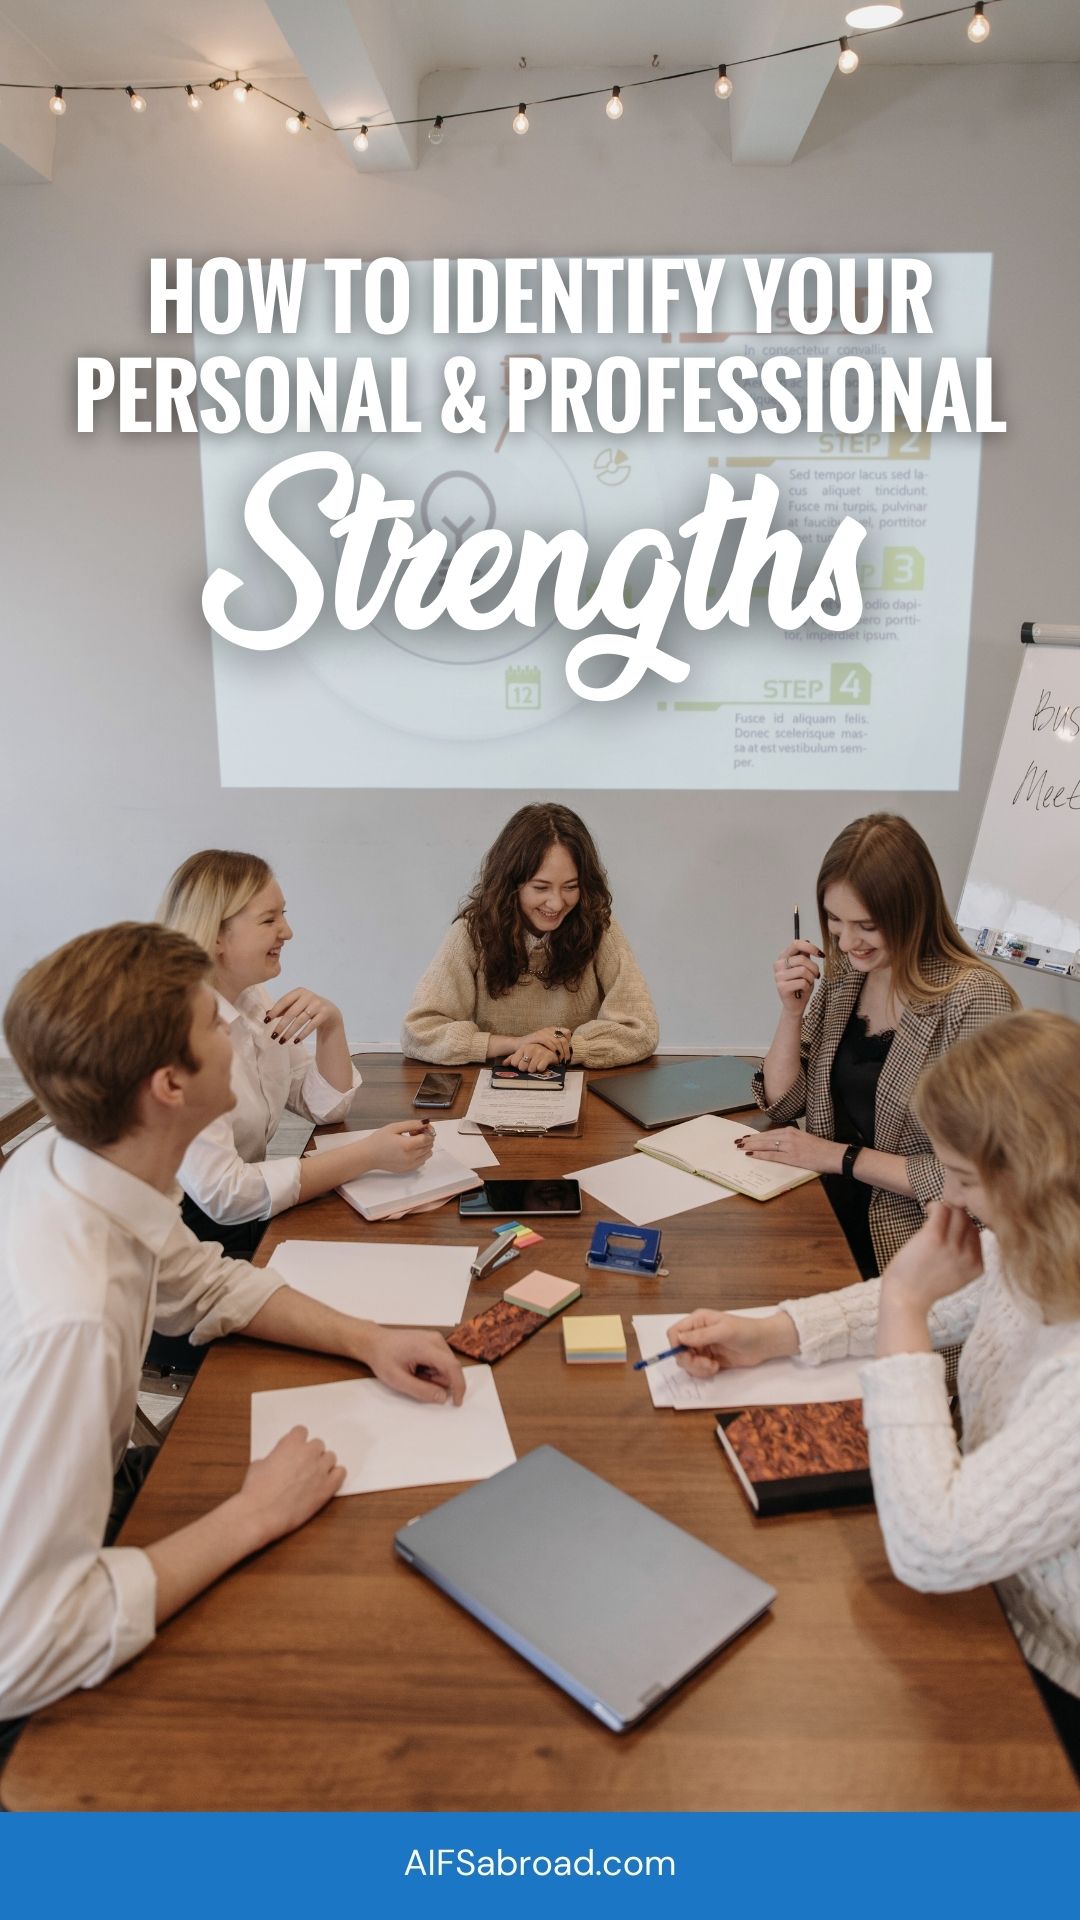 Pin image: Group of young professionals sitting around a table with text overlay "How to identify your personal and professional strengths"